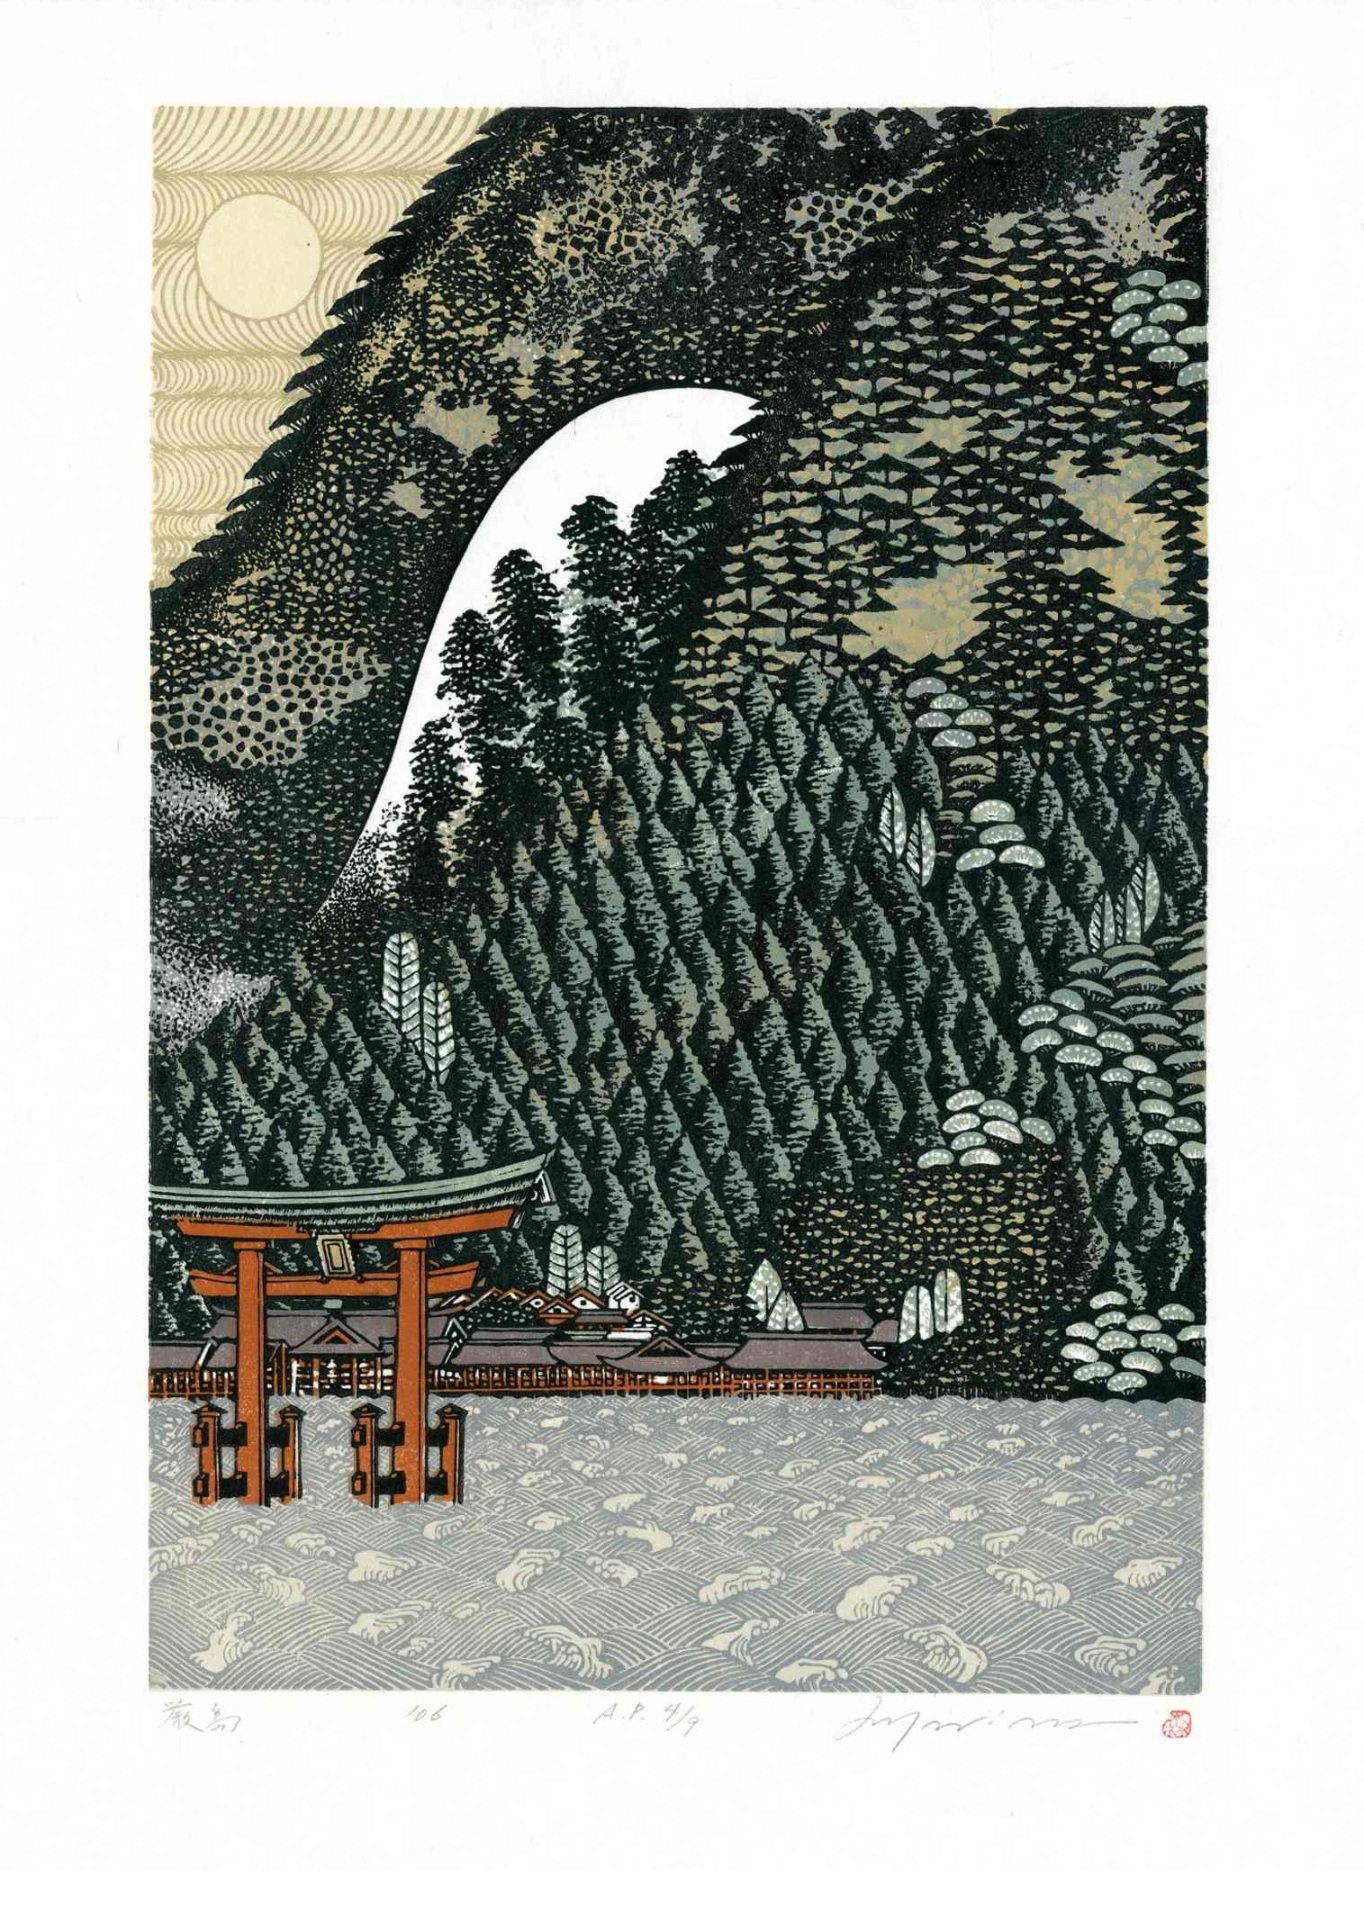 2000 16 1/2 by 22 1/2 inches from Rei Morimura Japanese Woodblock Prints